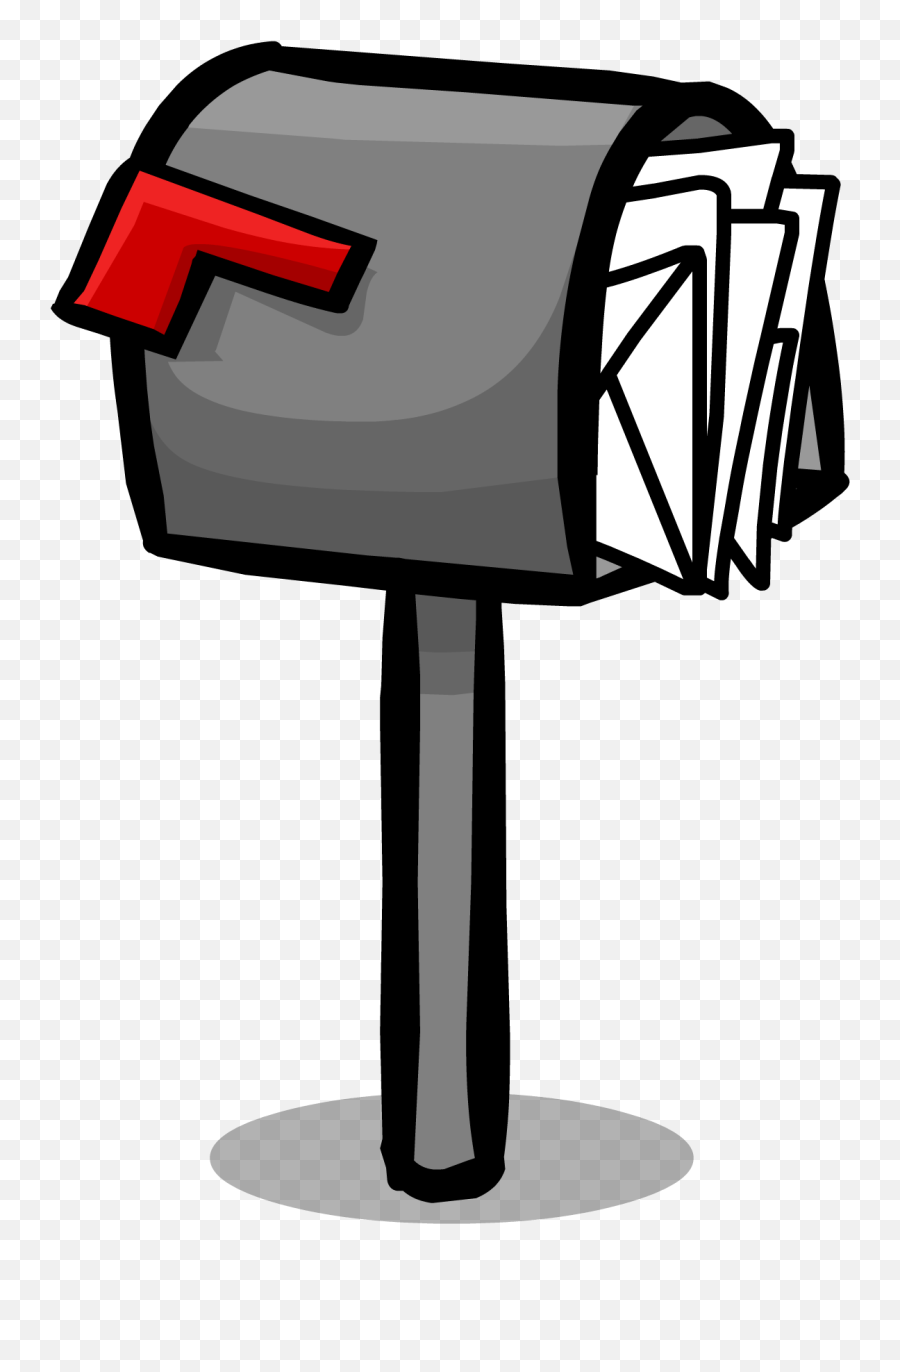 Download Mailbox Png Image For Free - Mailbox Clipart Png Emoji,Mailbox Png